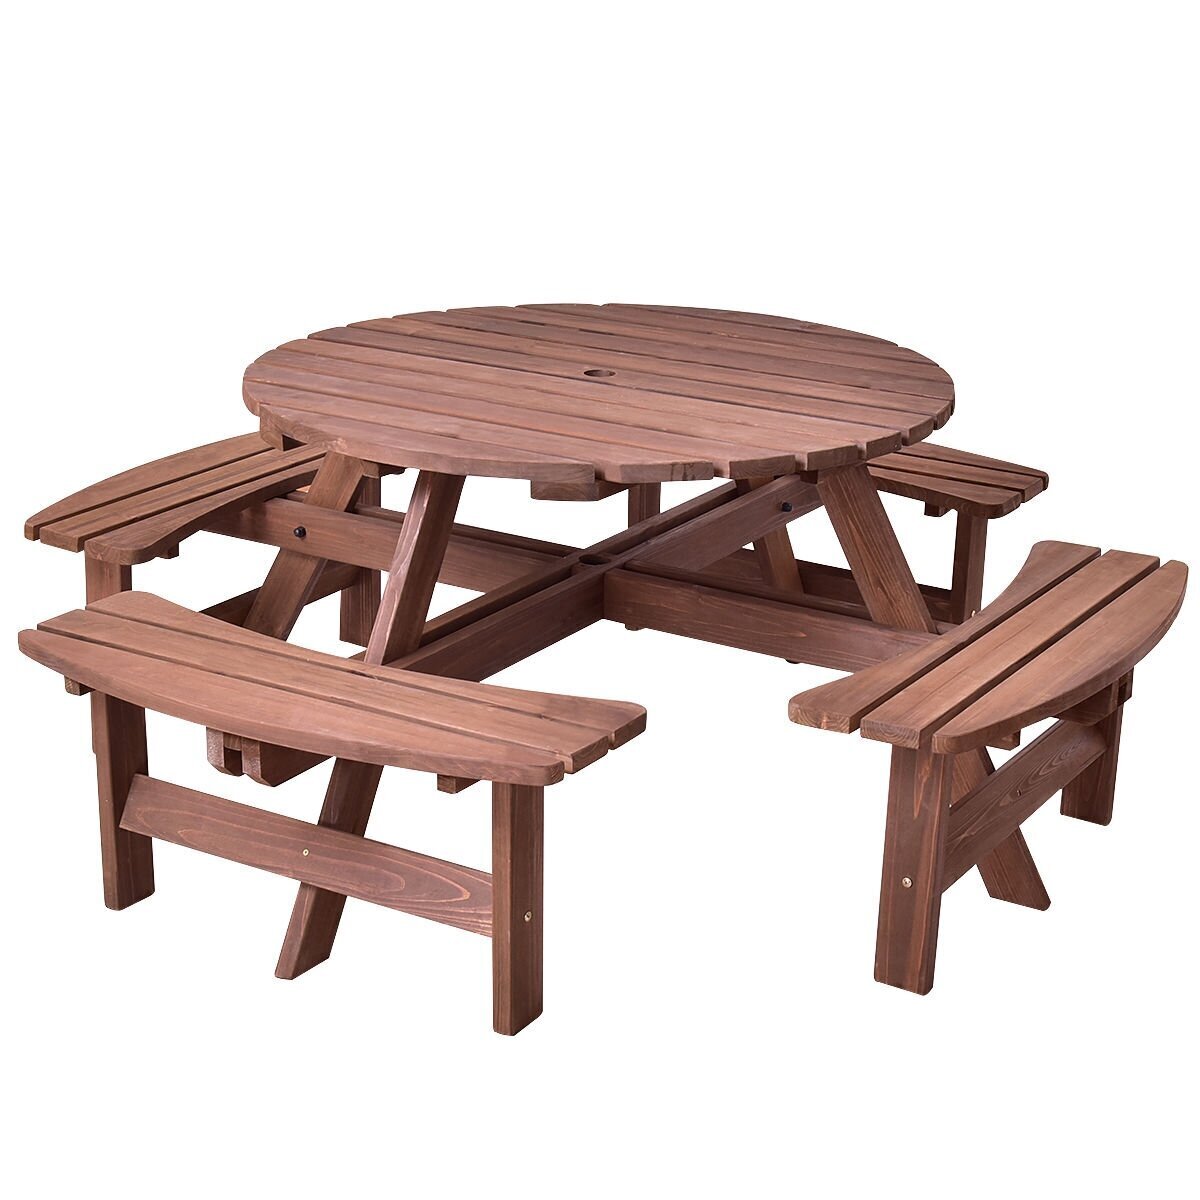 Picnic Style Large Round Patio Table